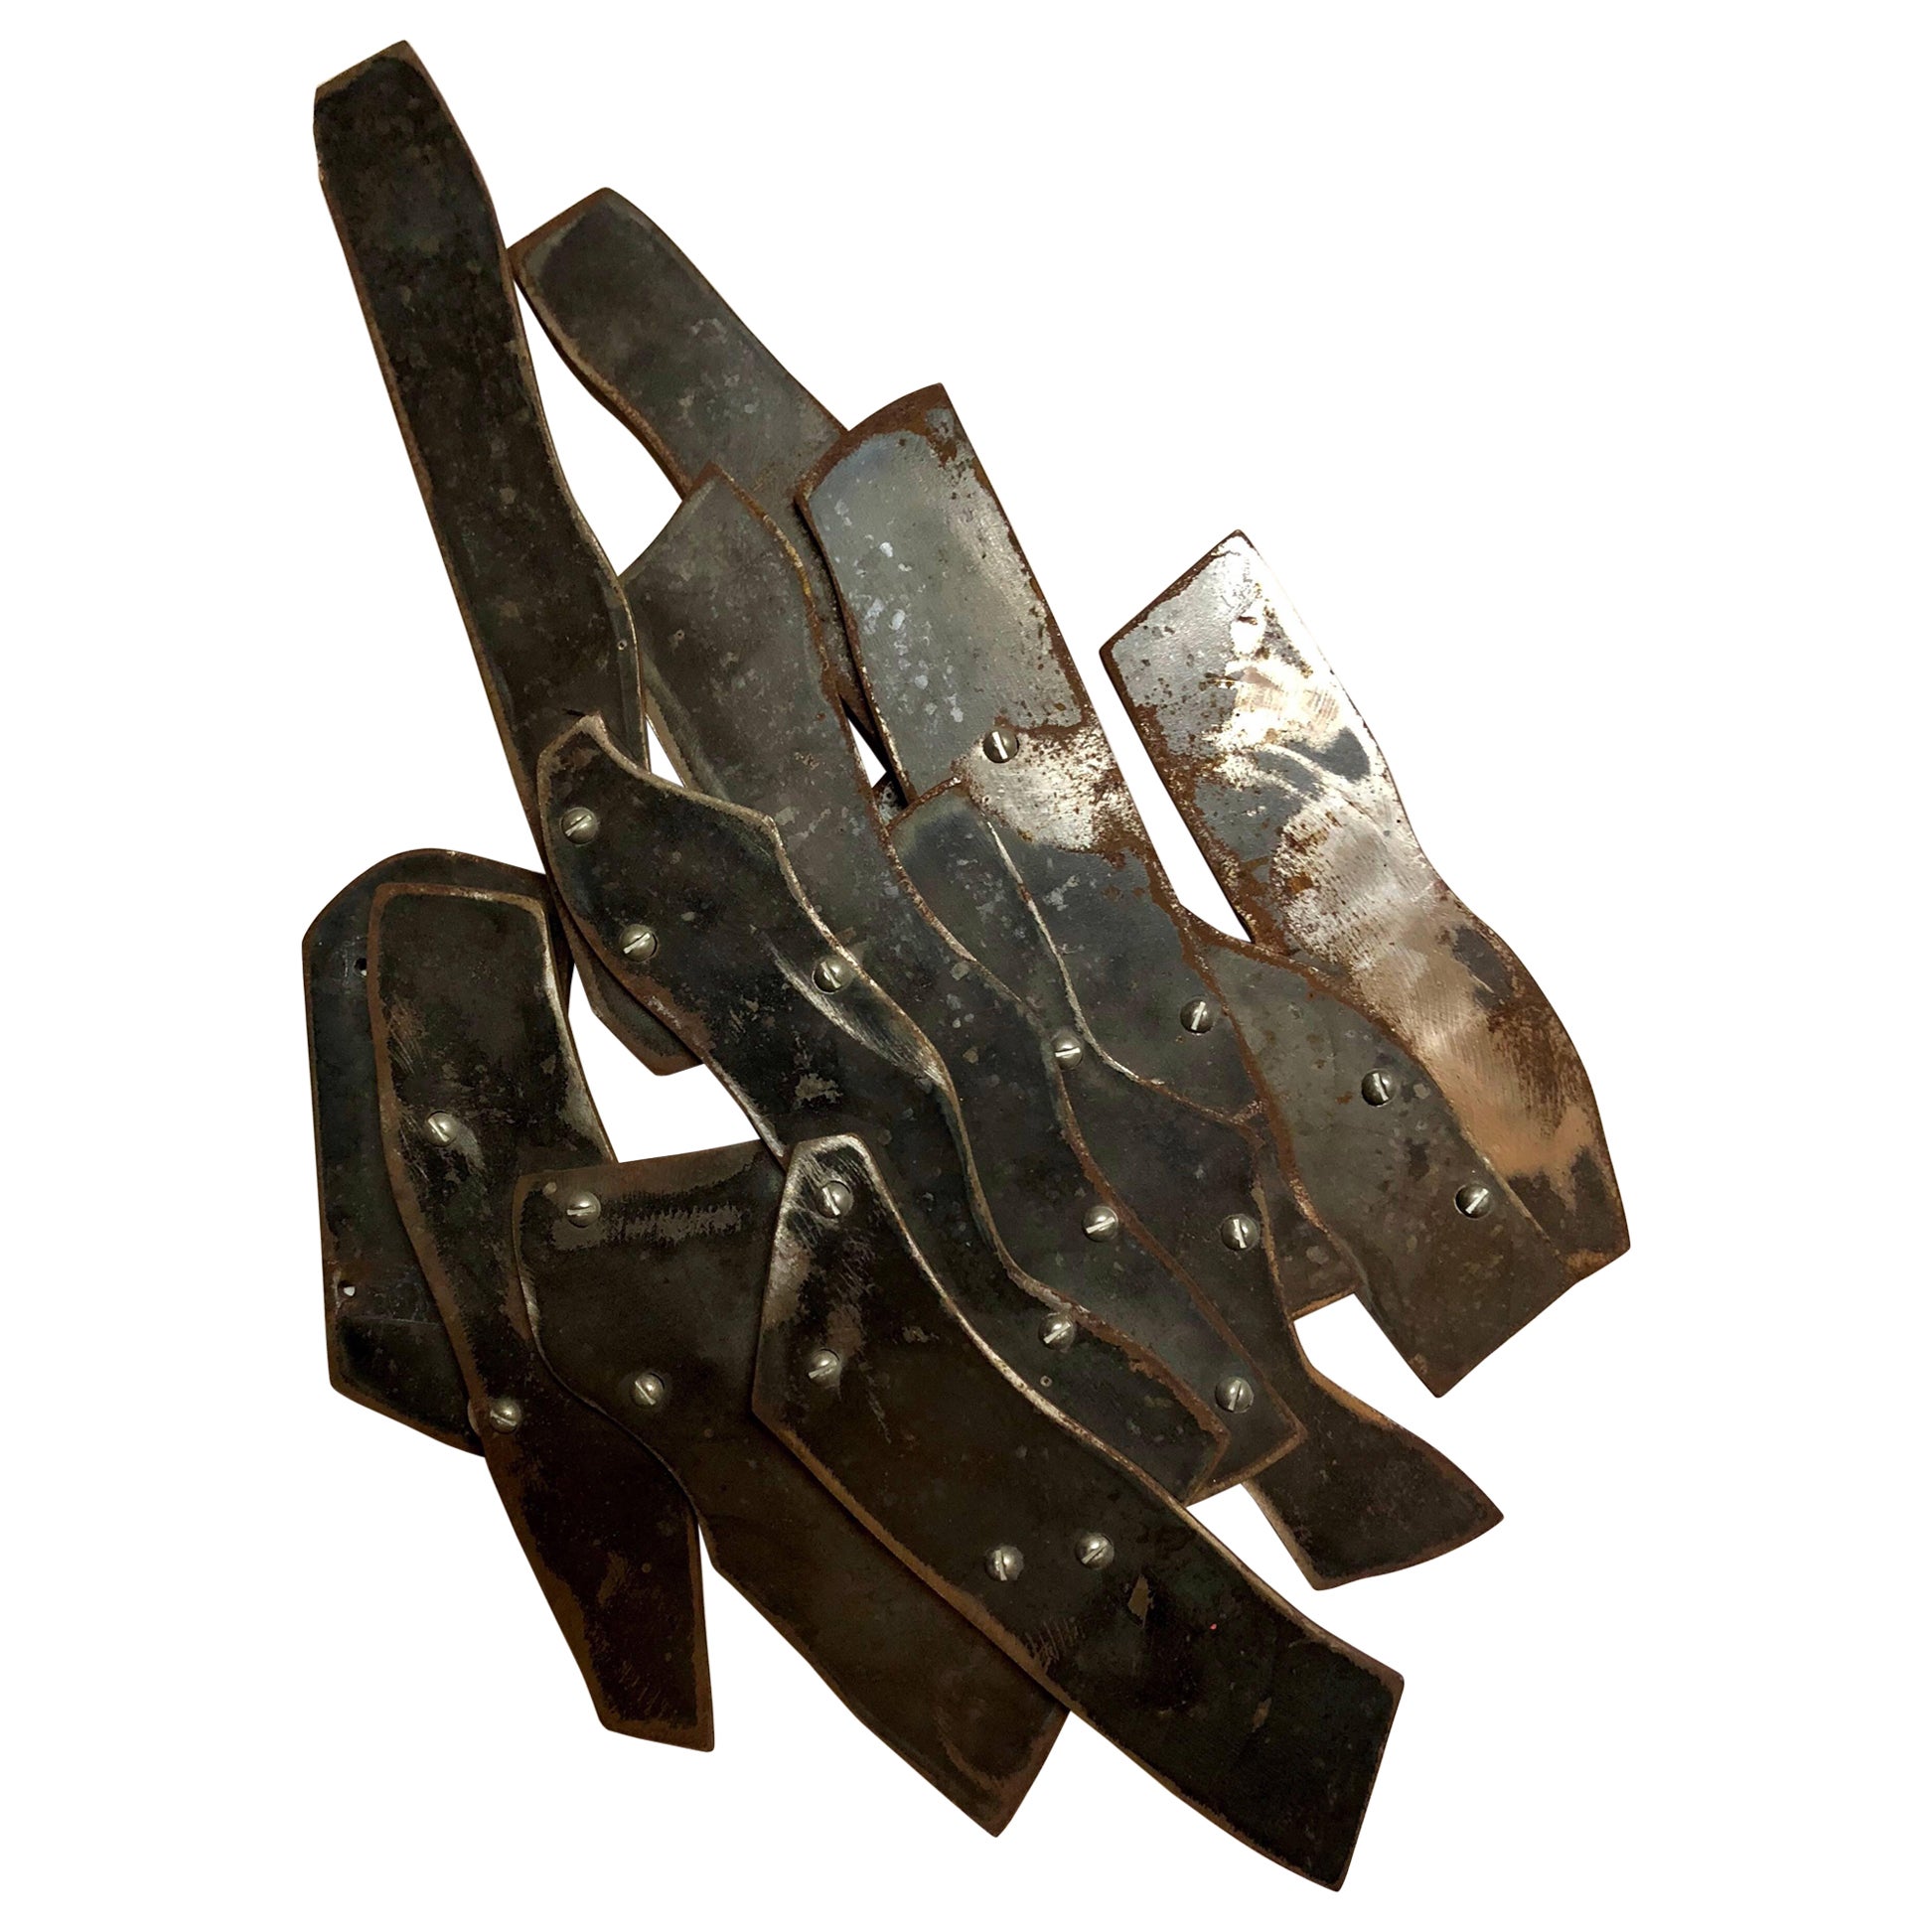 Robert Goodnough Abstract Sculpture - Abstract Expressionist Patinated Metal Assemblage Sculpture Steel, Nuts, Bolts